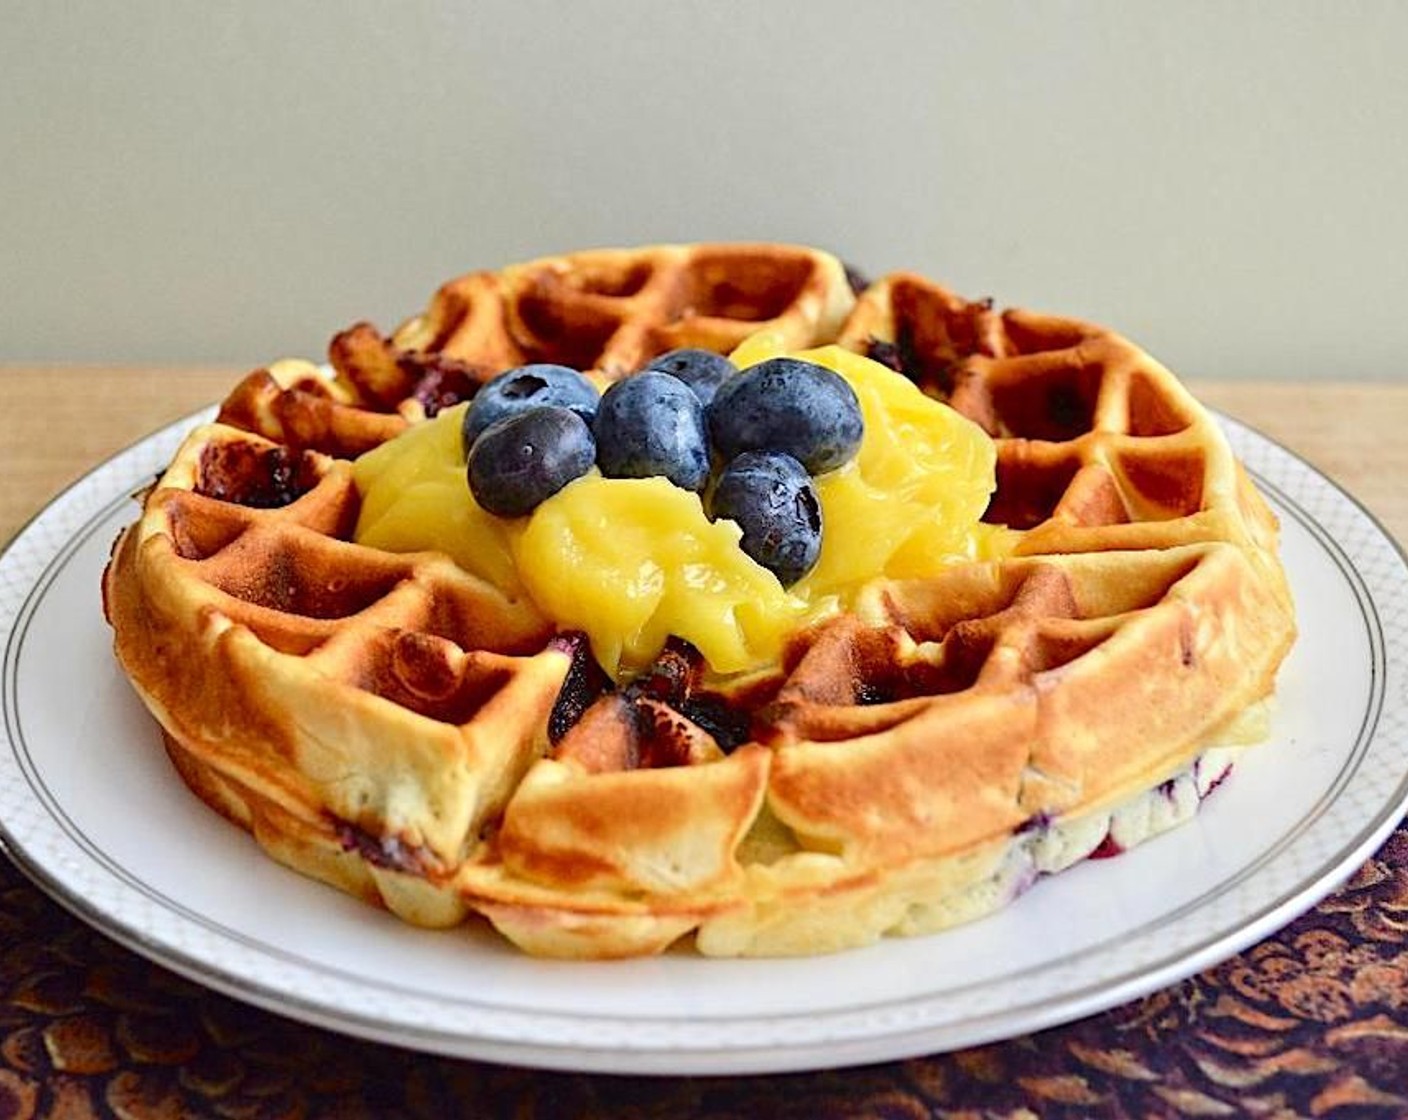 step 4 Serve it immediately with 1/4 cup of the Lemon Curd (1 cup) on top and extra blueberries. Repeat this with the remaining batter to get 4 big waffles total. Enjoy!